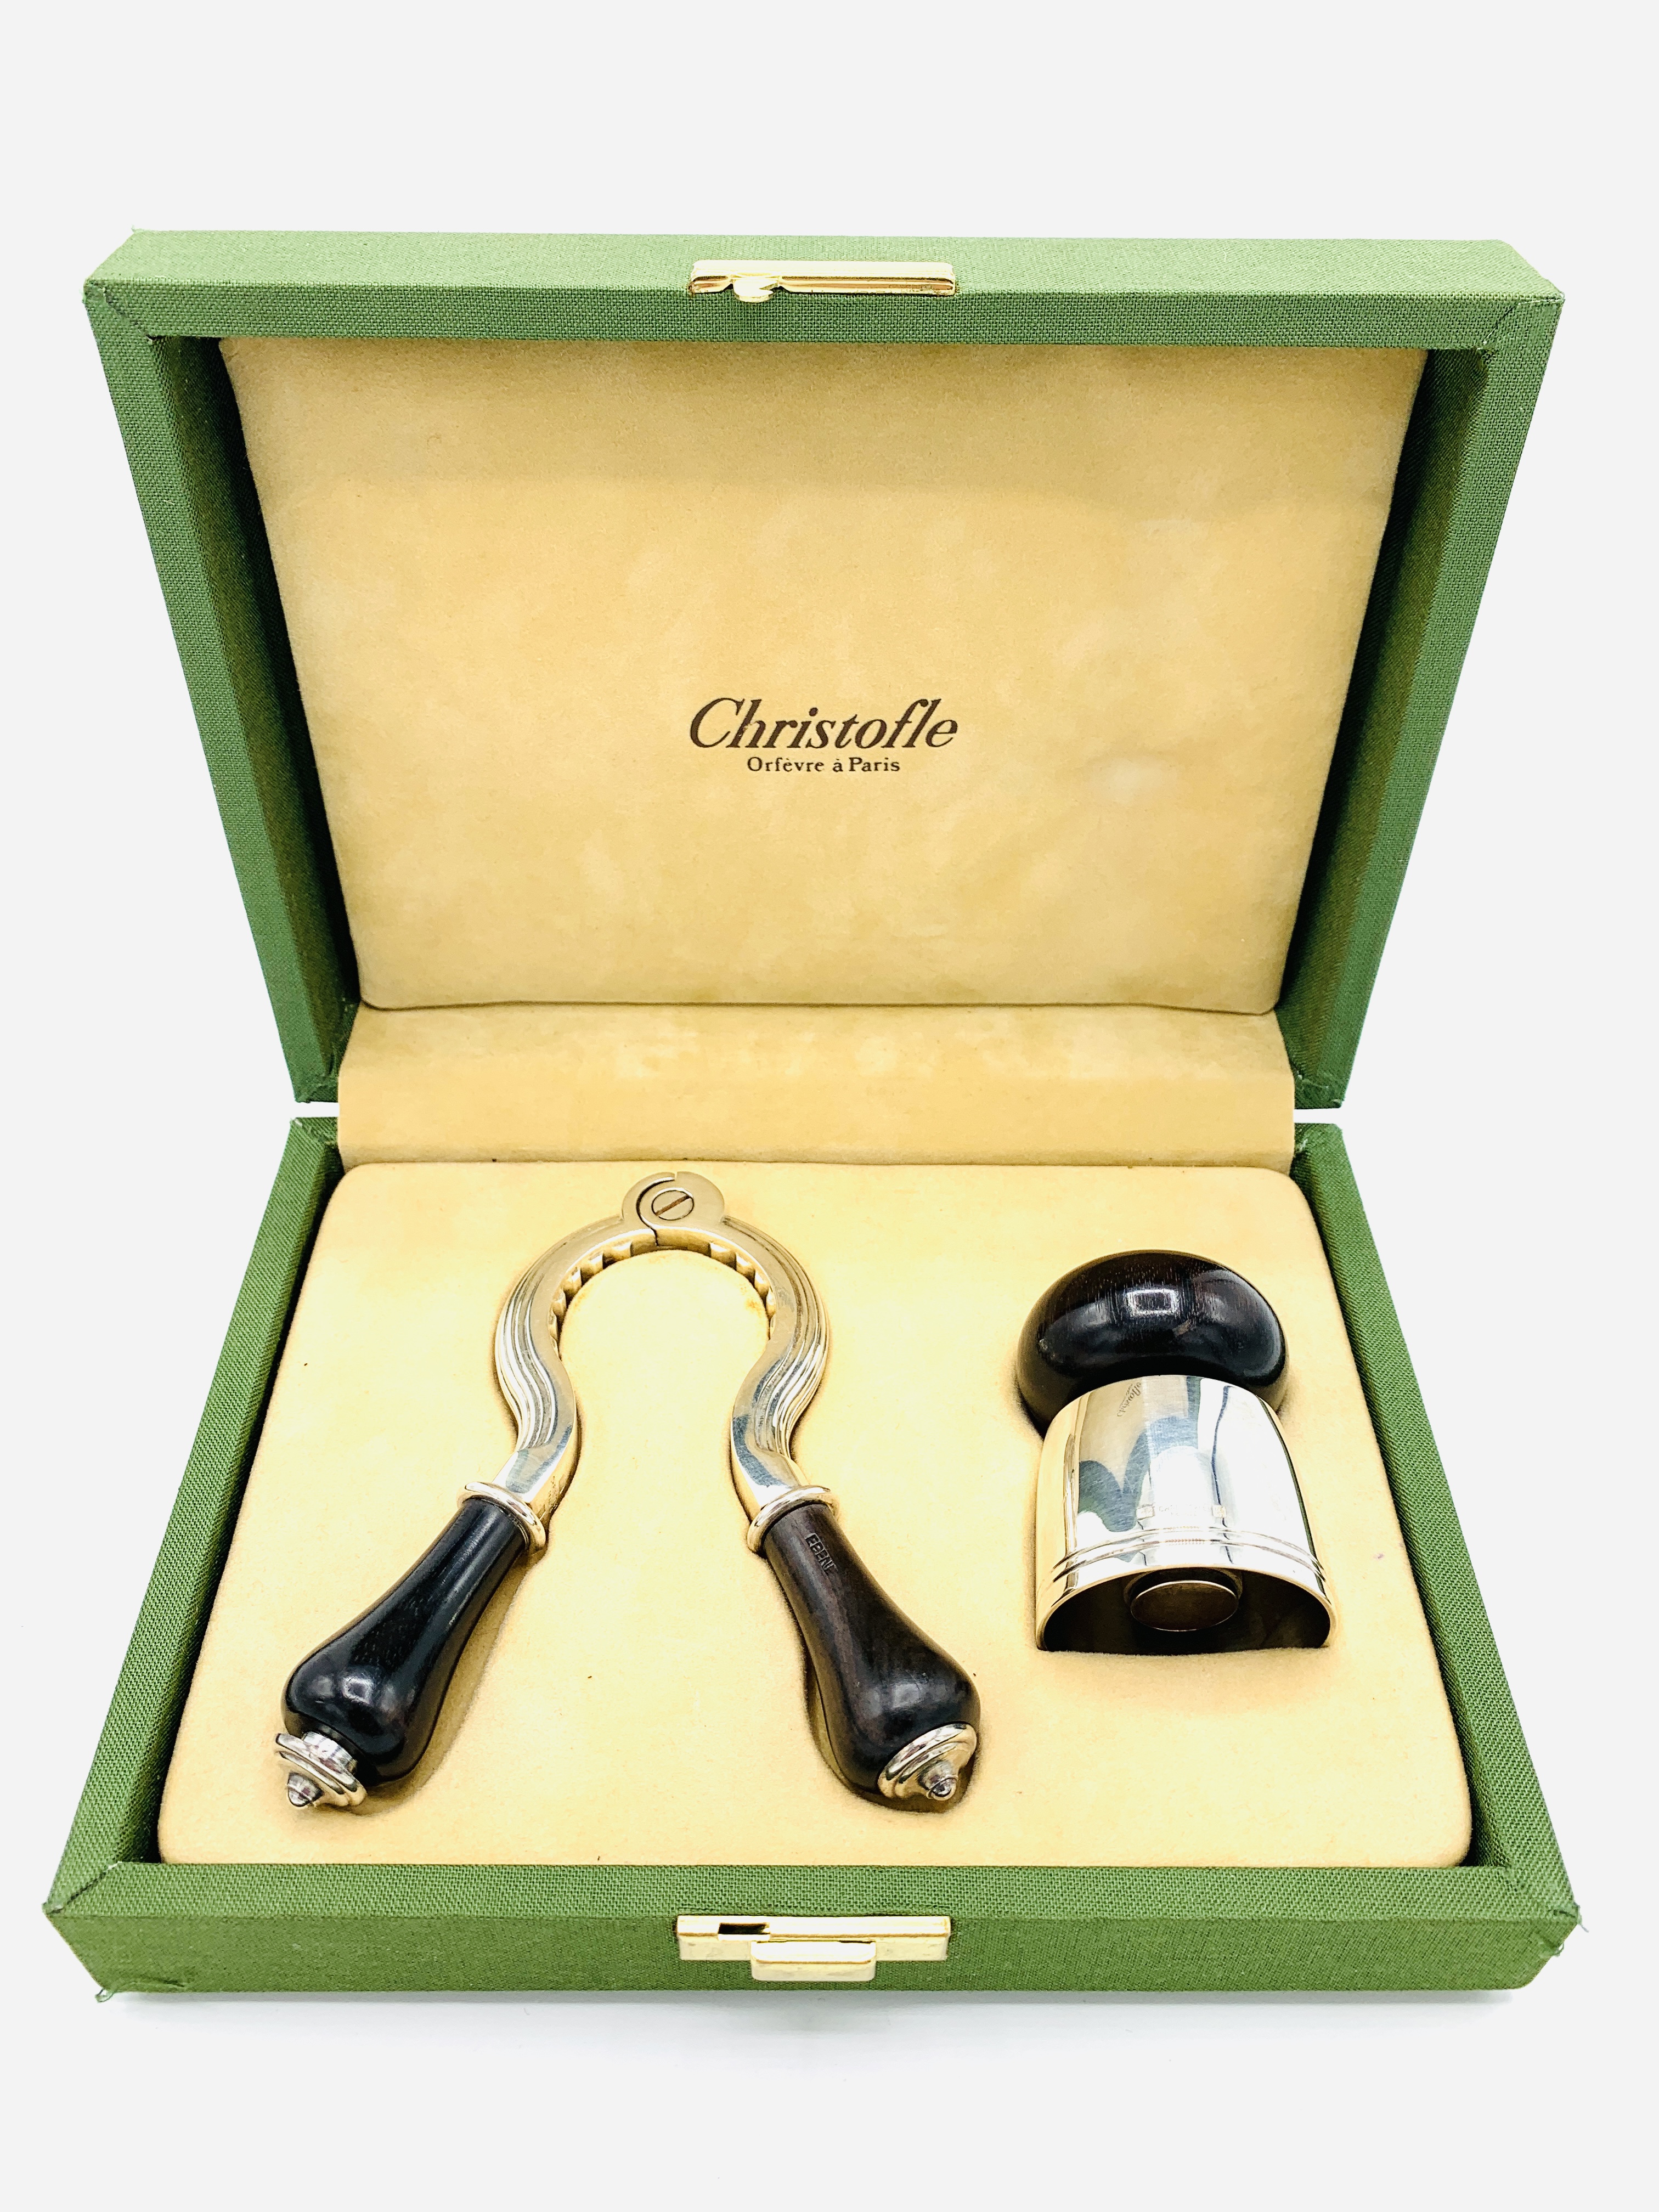 Christofle boxed champagne opener and bottle stopper. - Image 2 of 3